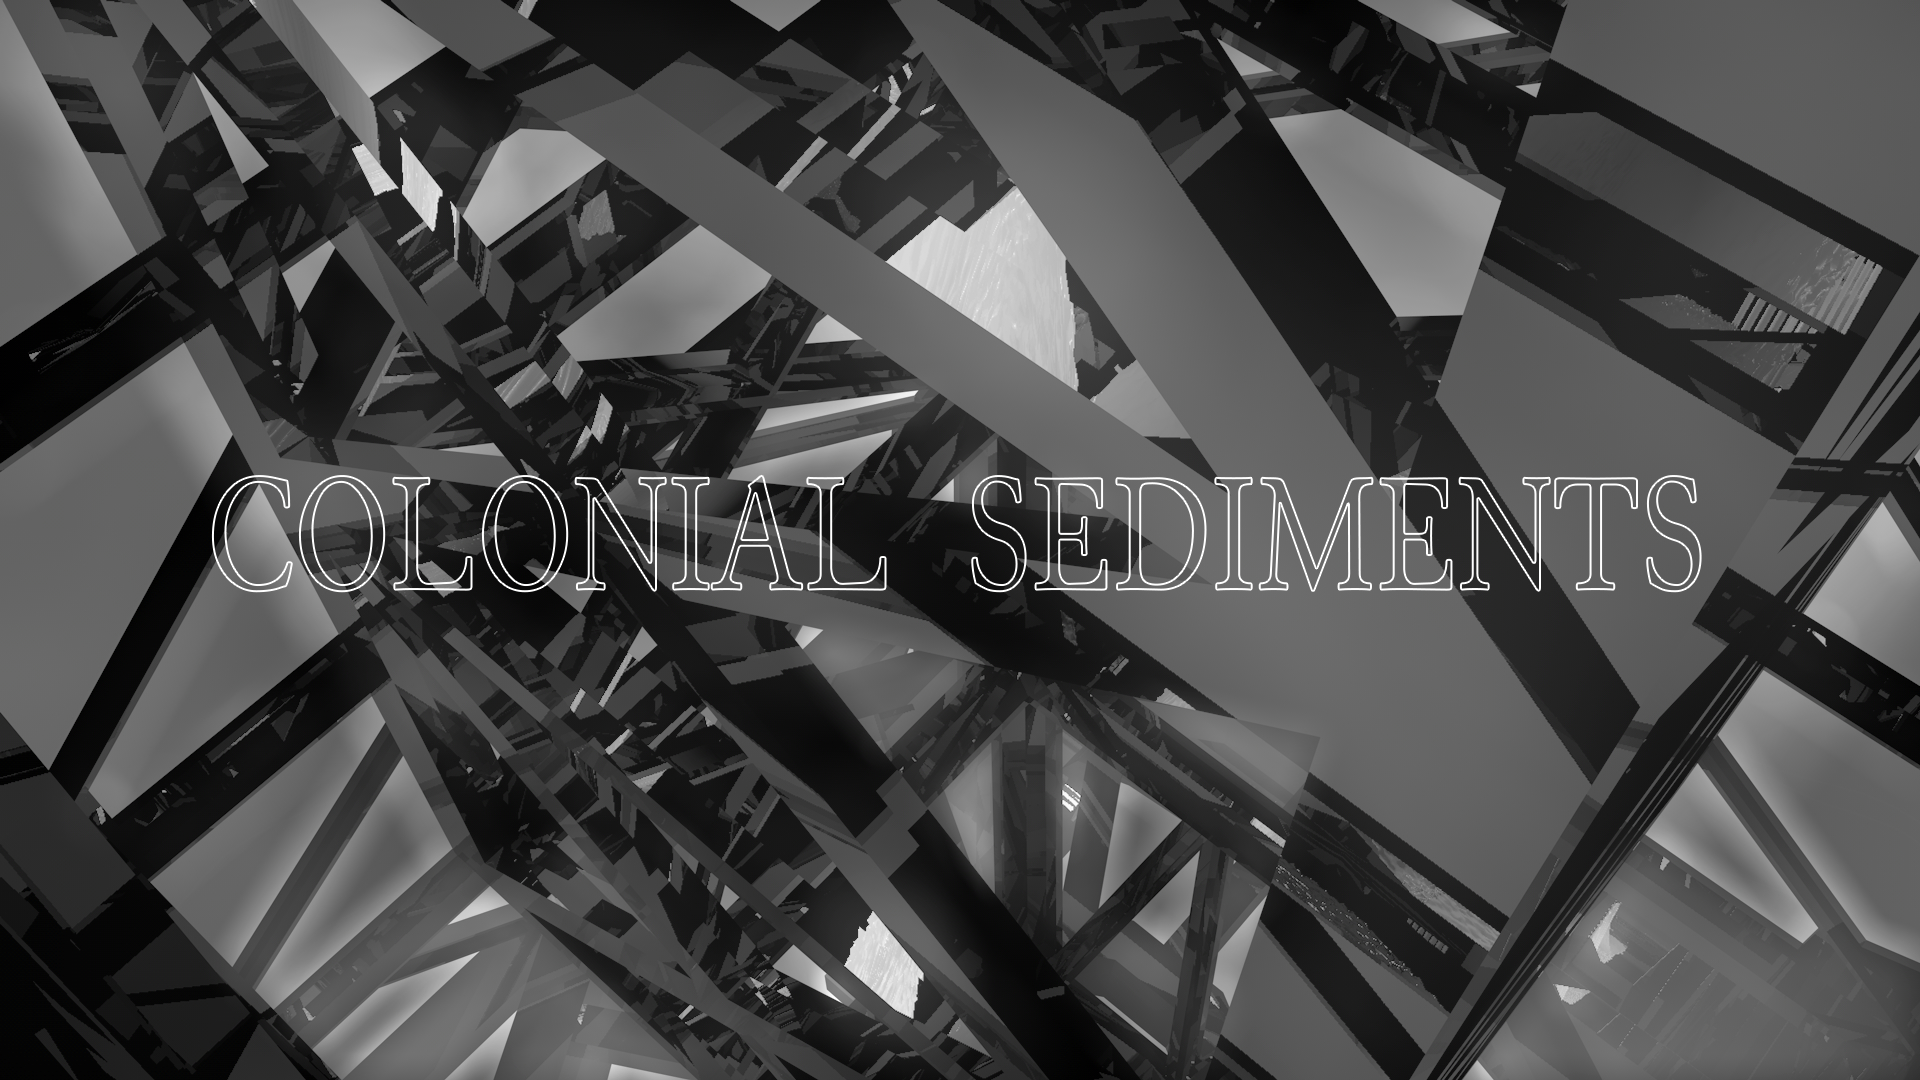 Still from the Colonial Sediments video (2020). Available during DEMO Moving Image Festival.